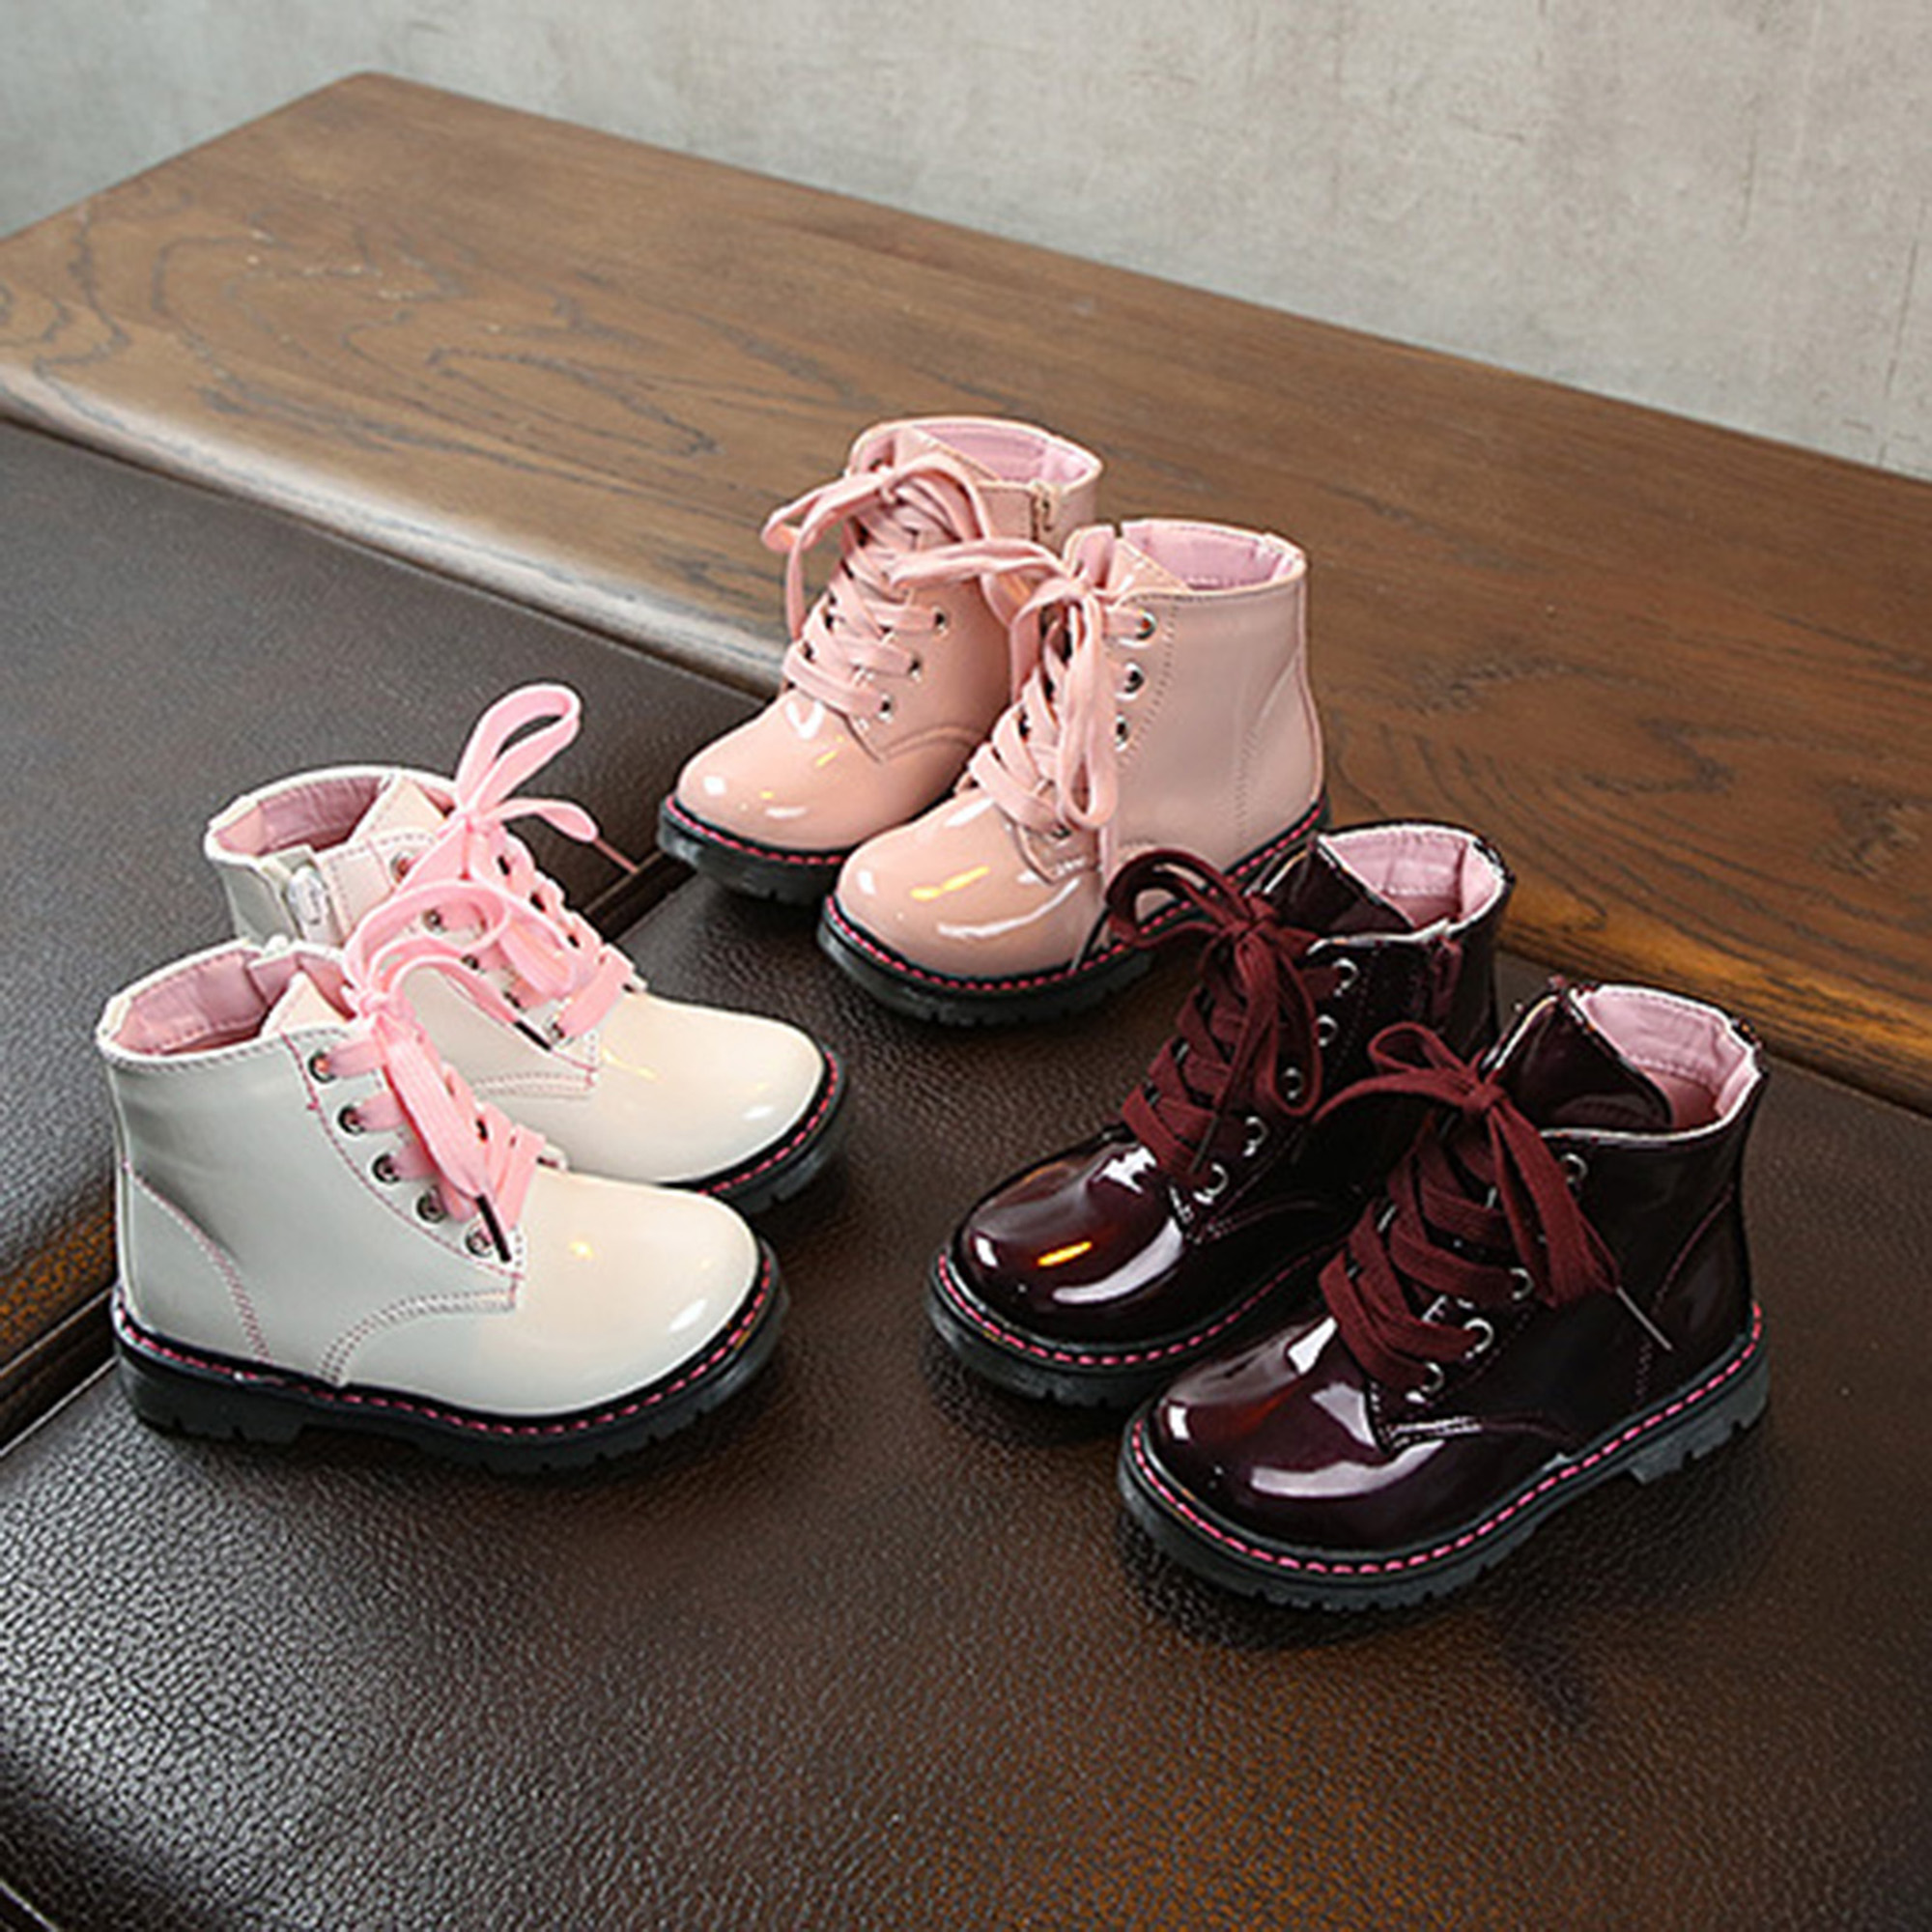 Girls-Boys-Toddler-Autumn-Spring-Martin-Boots-Fashion-Side-Zipper-Lace-Up-PU-Leather-Warm-Shoes-1